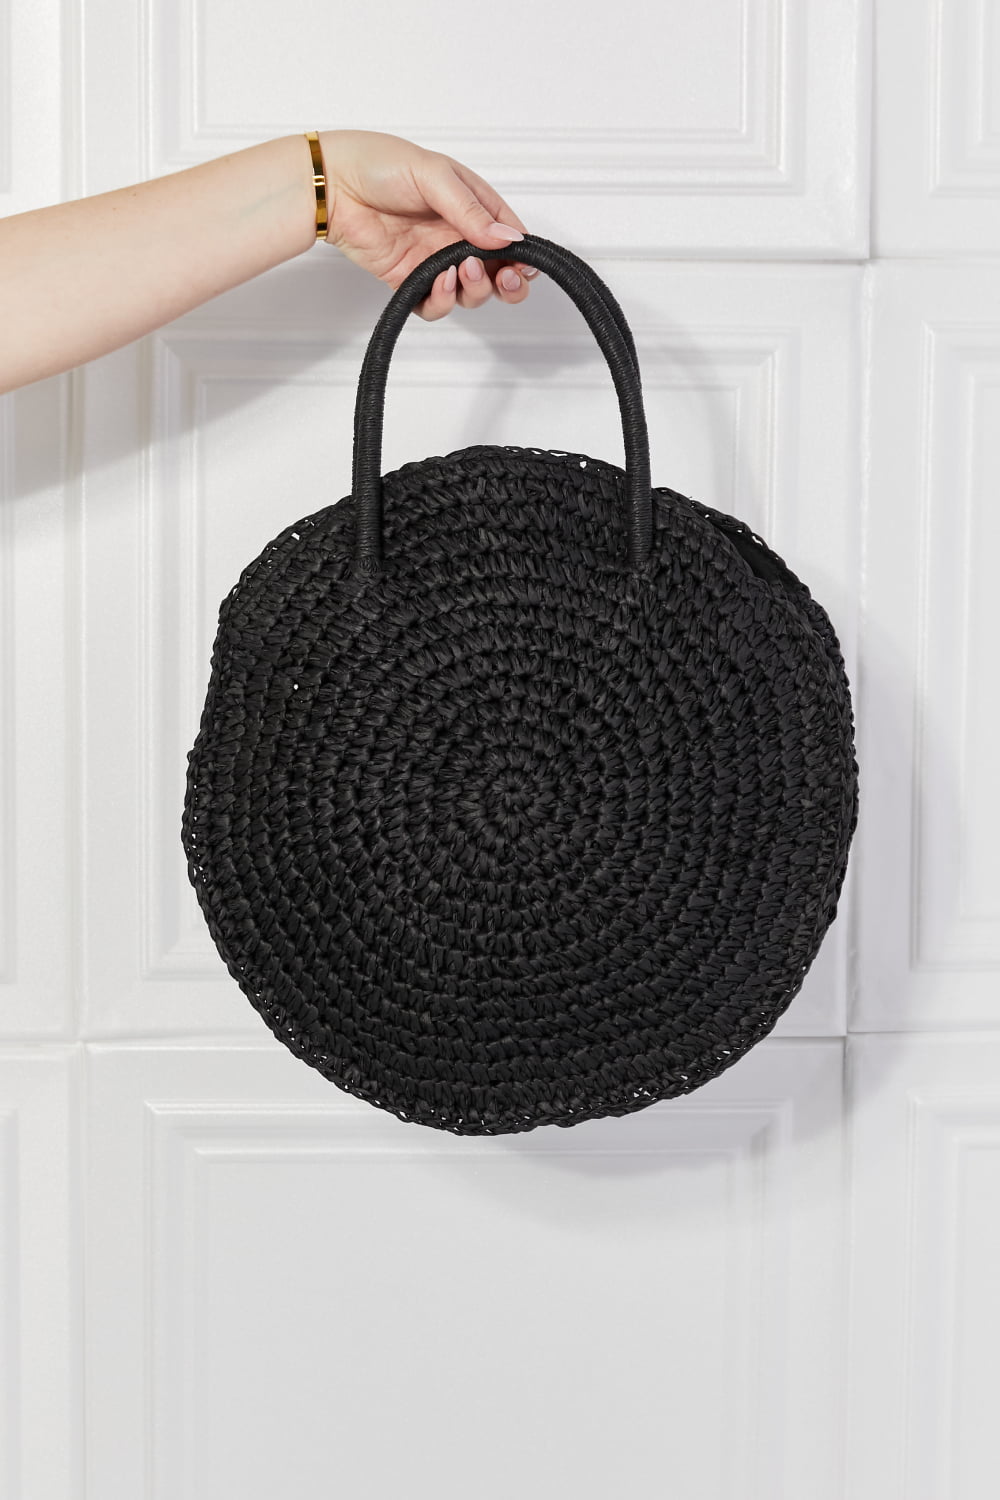 Justin Taylor Beach Date Straw Rattan Handbag in Black  Southern Soul Collectives 